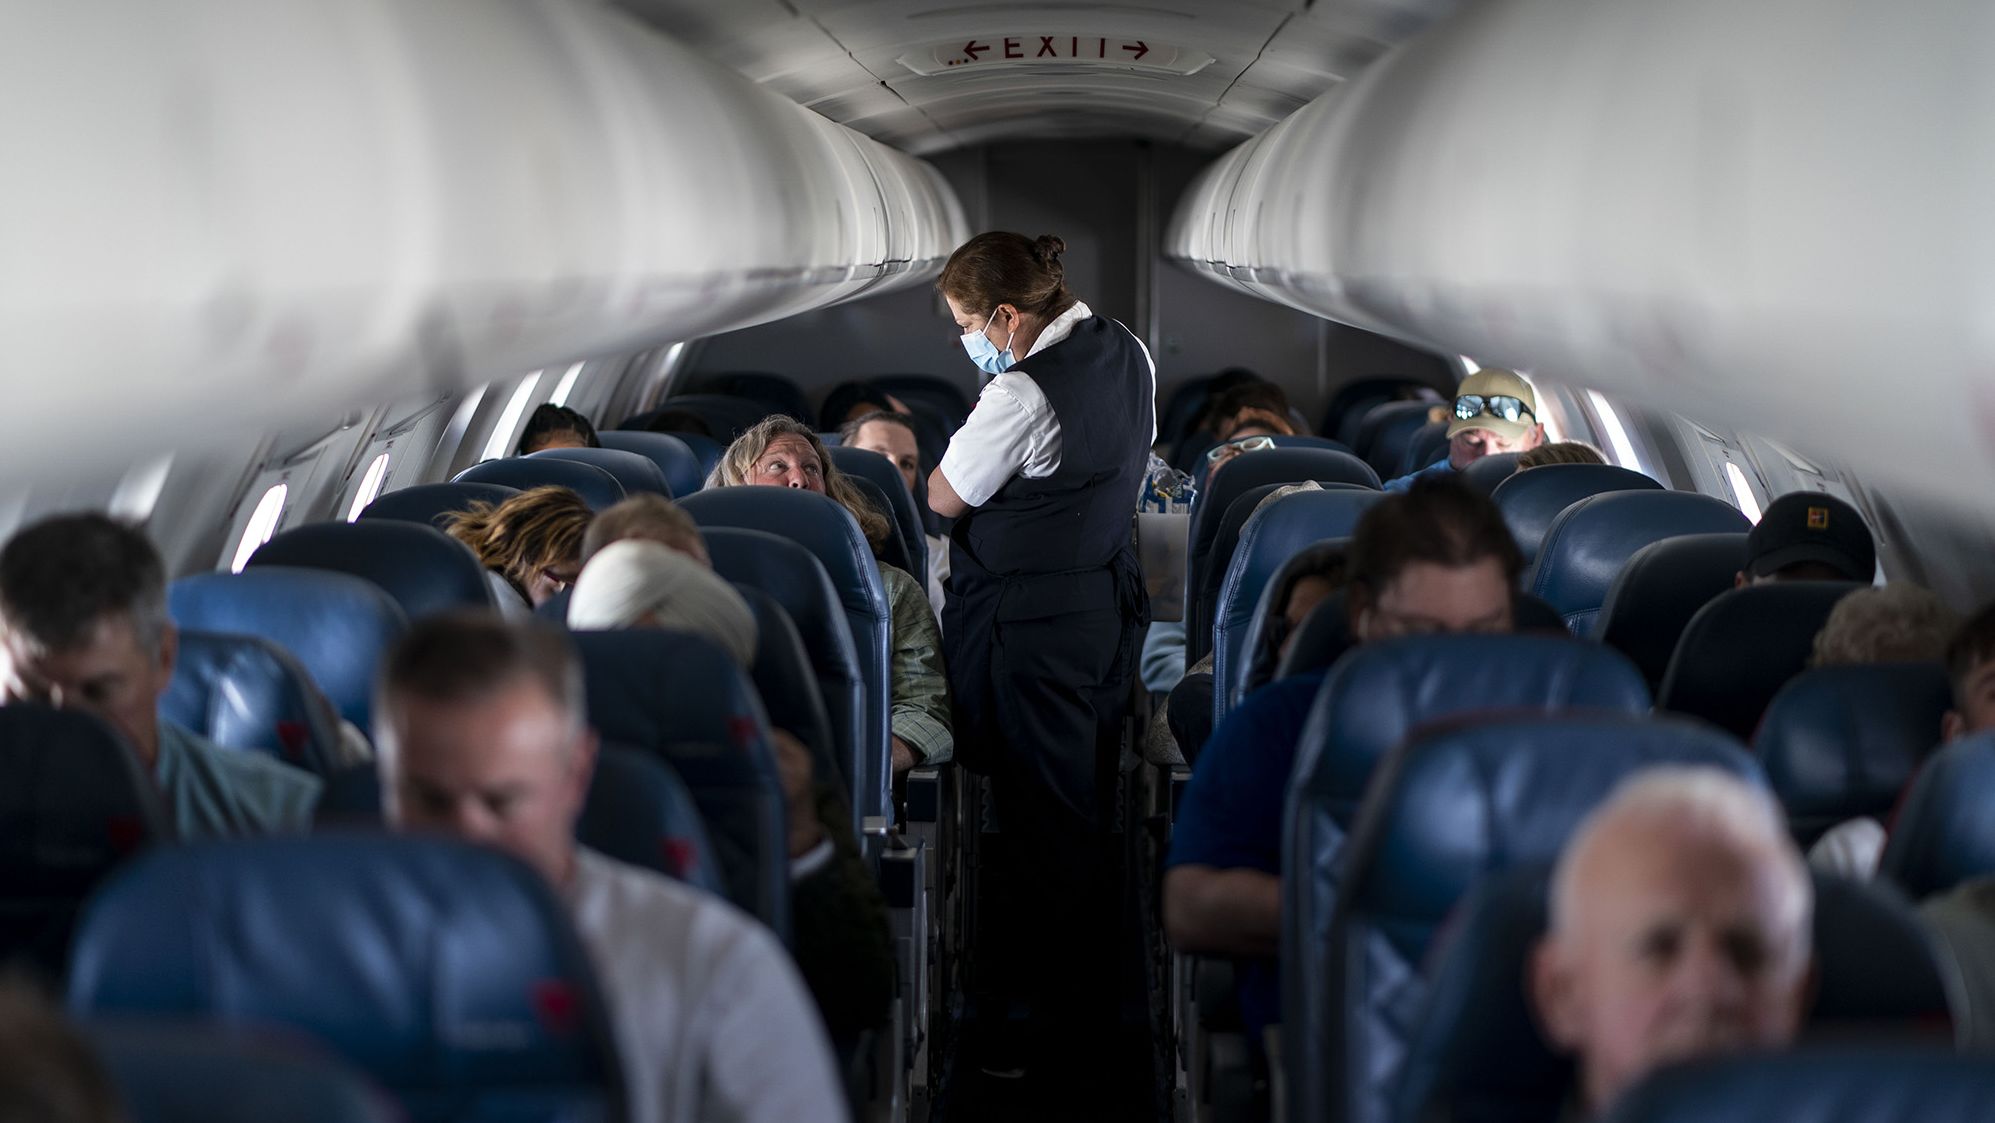 As disruptive airplane passenger incidents regularly hit the headlines, aviation experts and flight attendants are questioning what can be done to turn the tide.